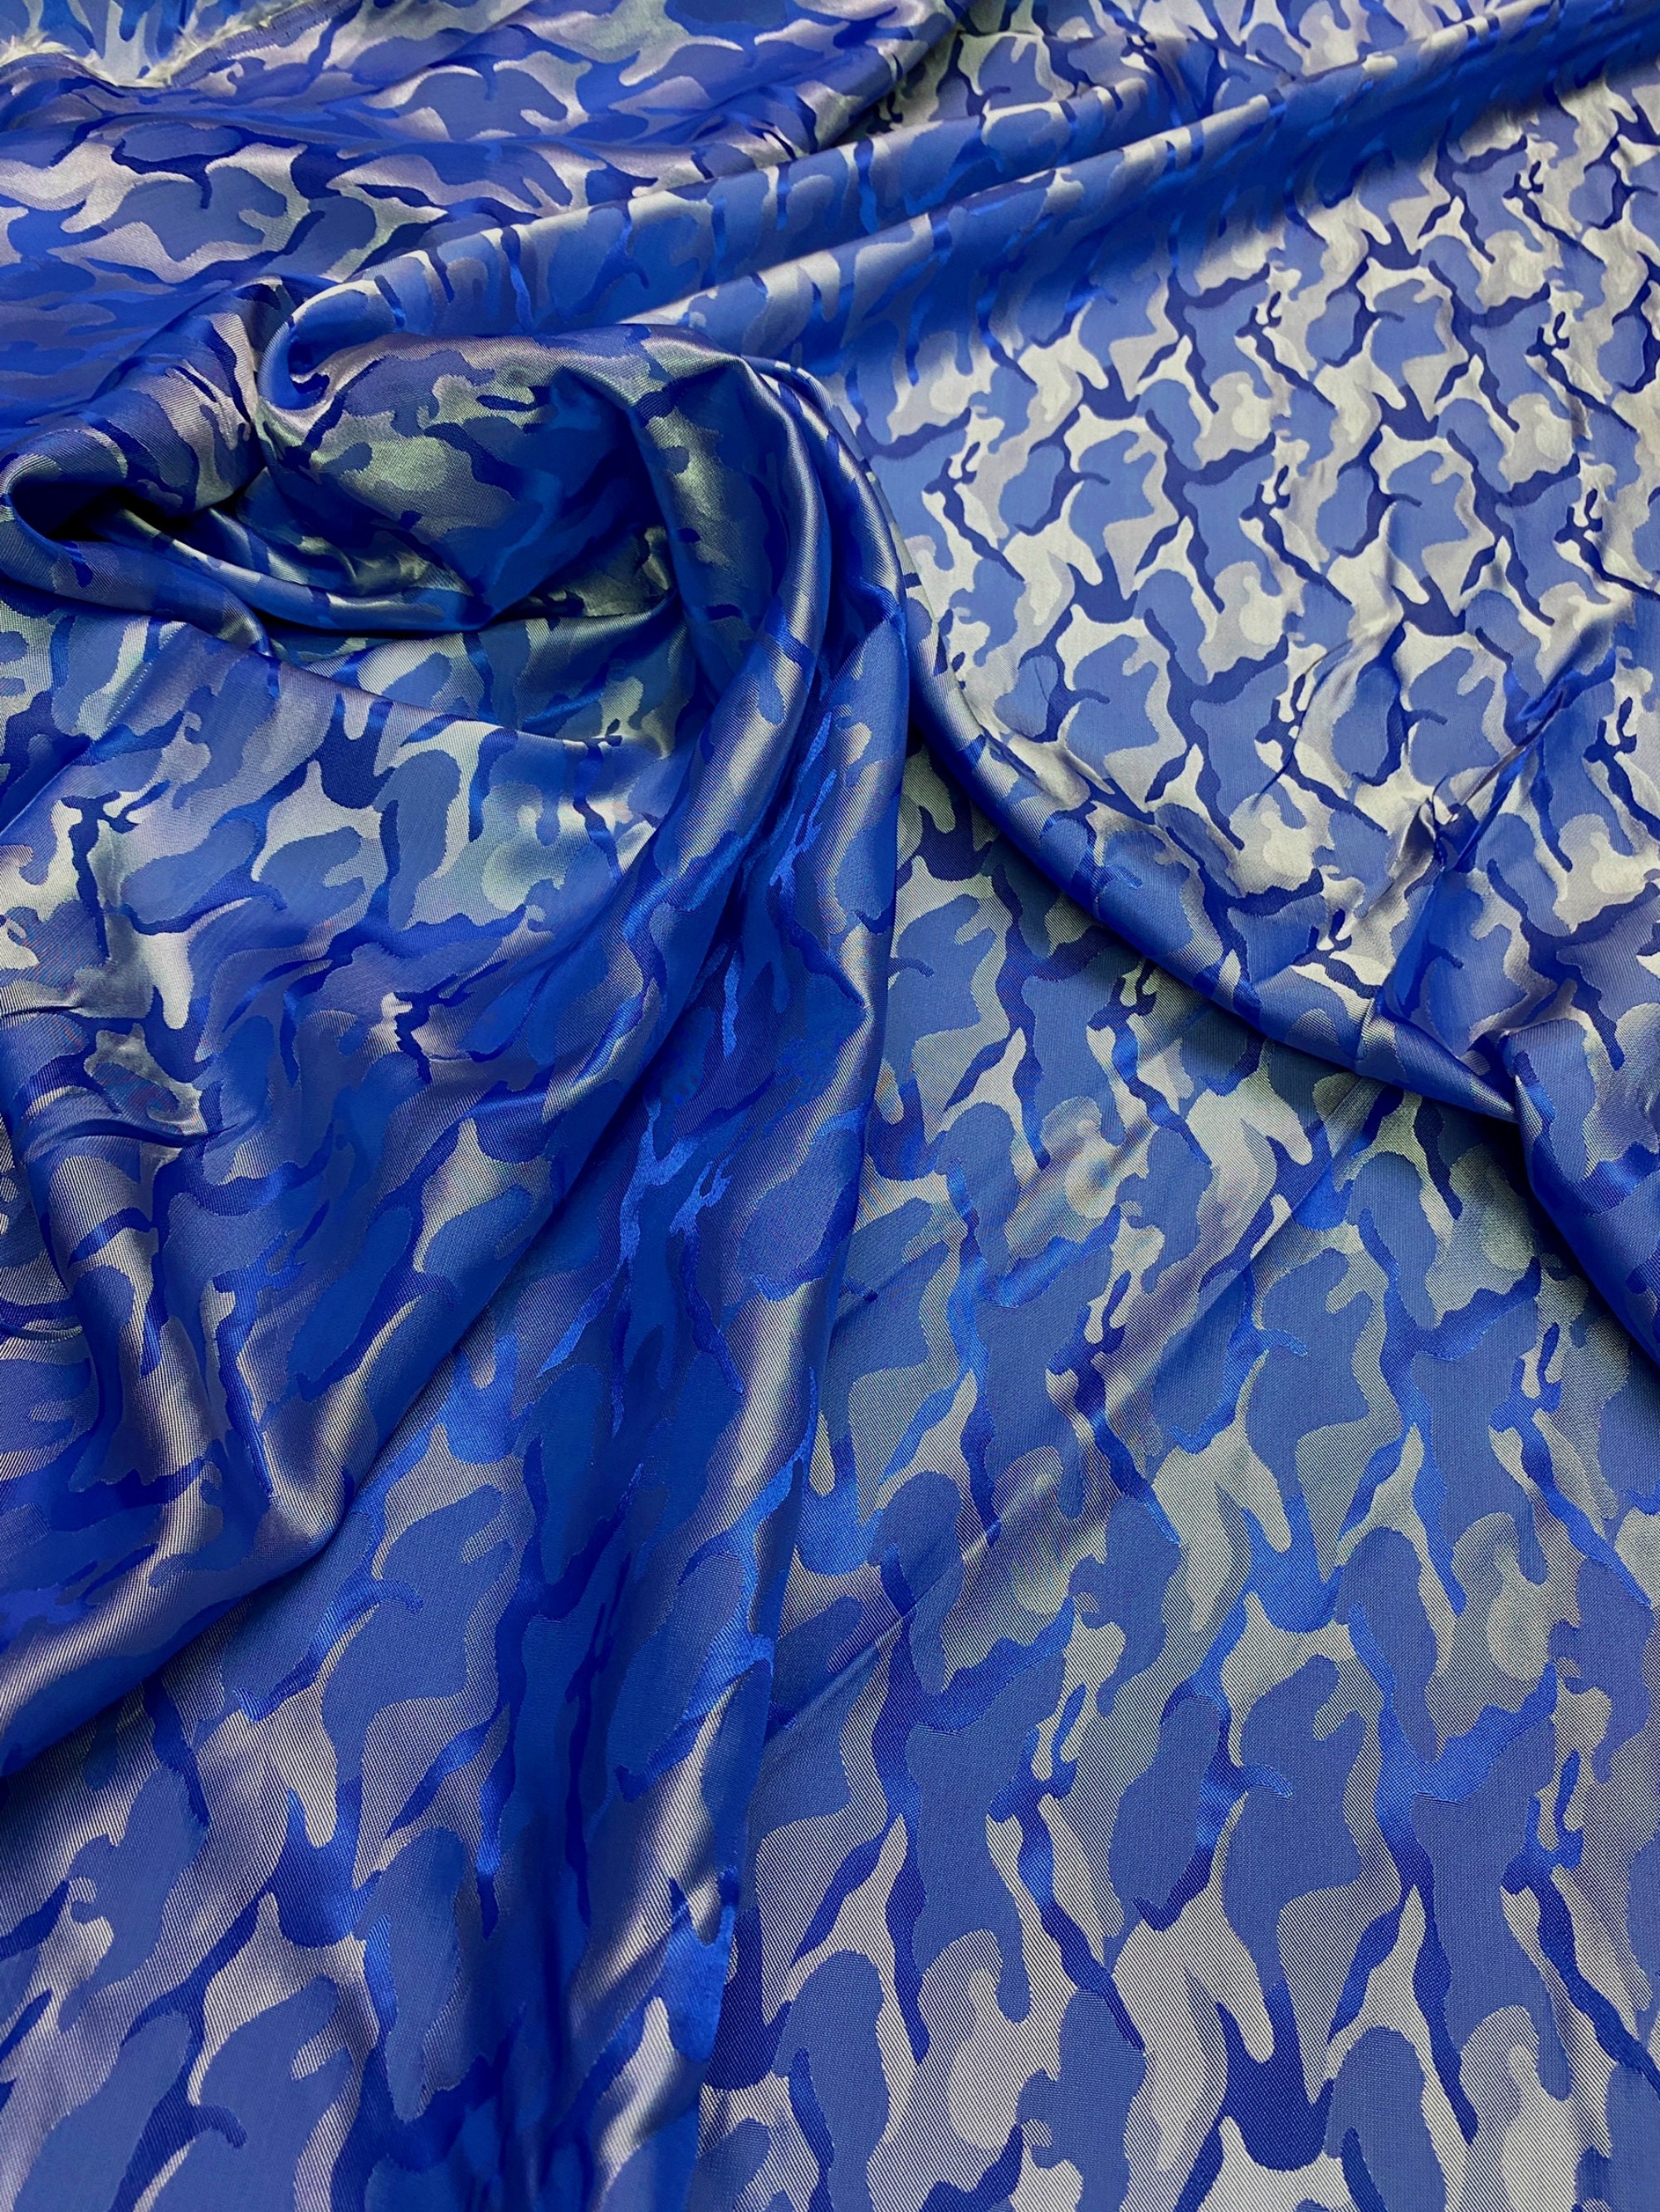 Blue Silver Two-tone Iridescent Army Camouflage Viscose - Etsy